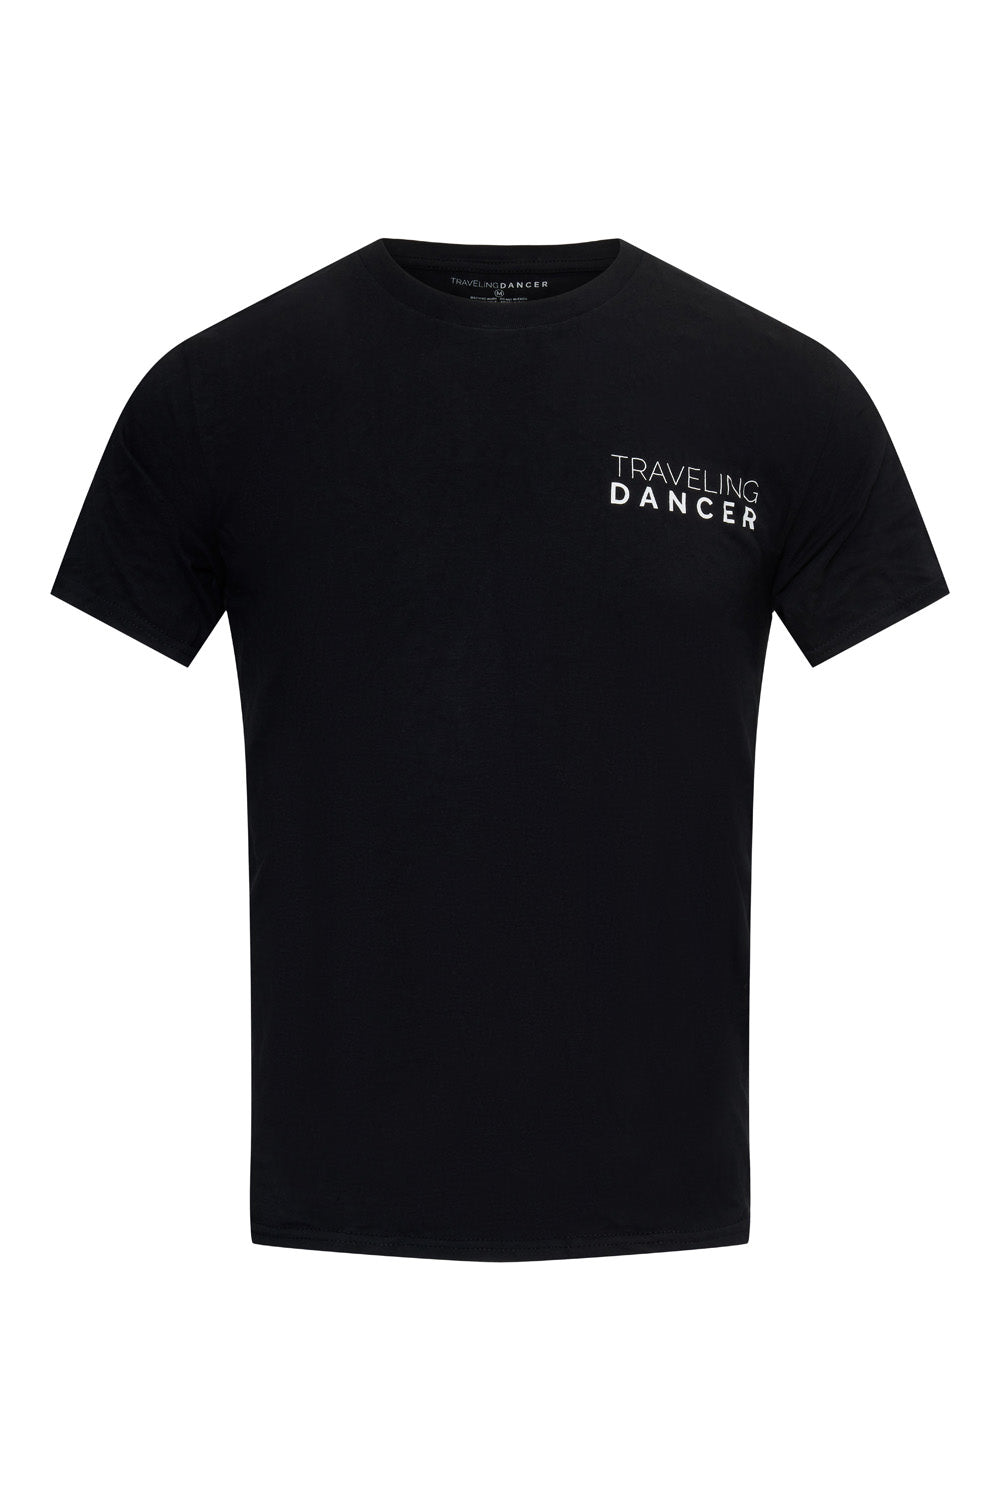 We Are All Traveling Dancer Unisex T-Shirt